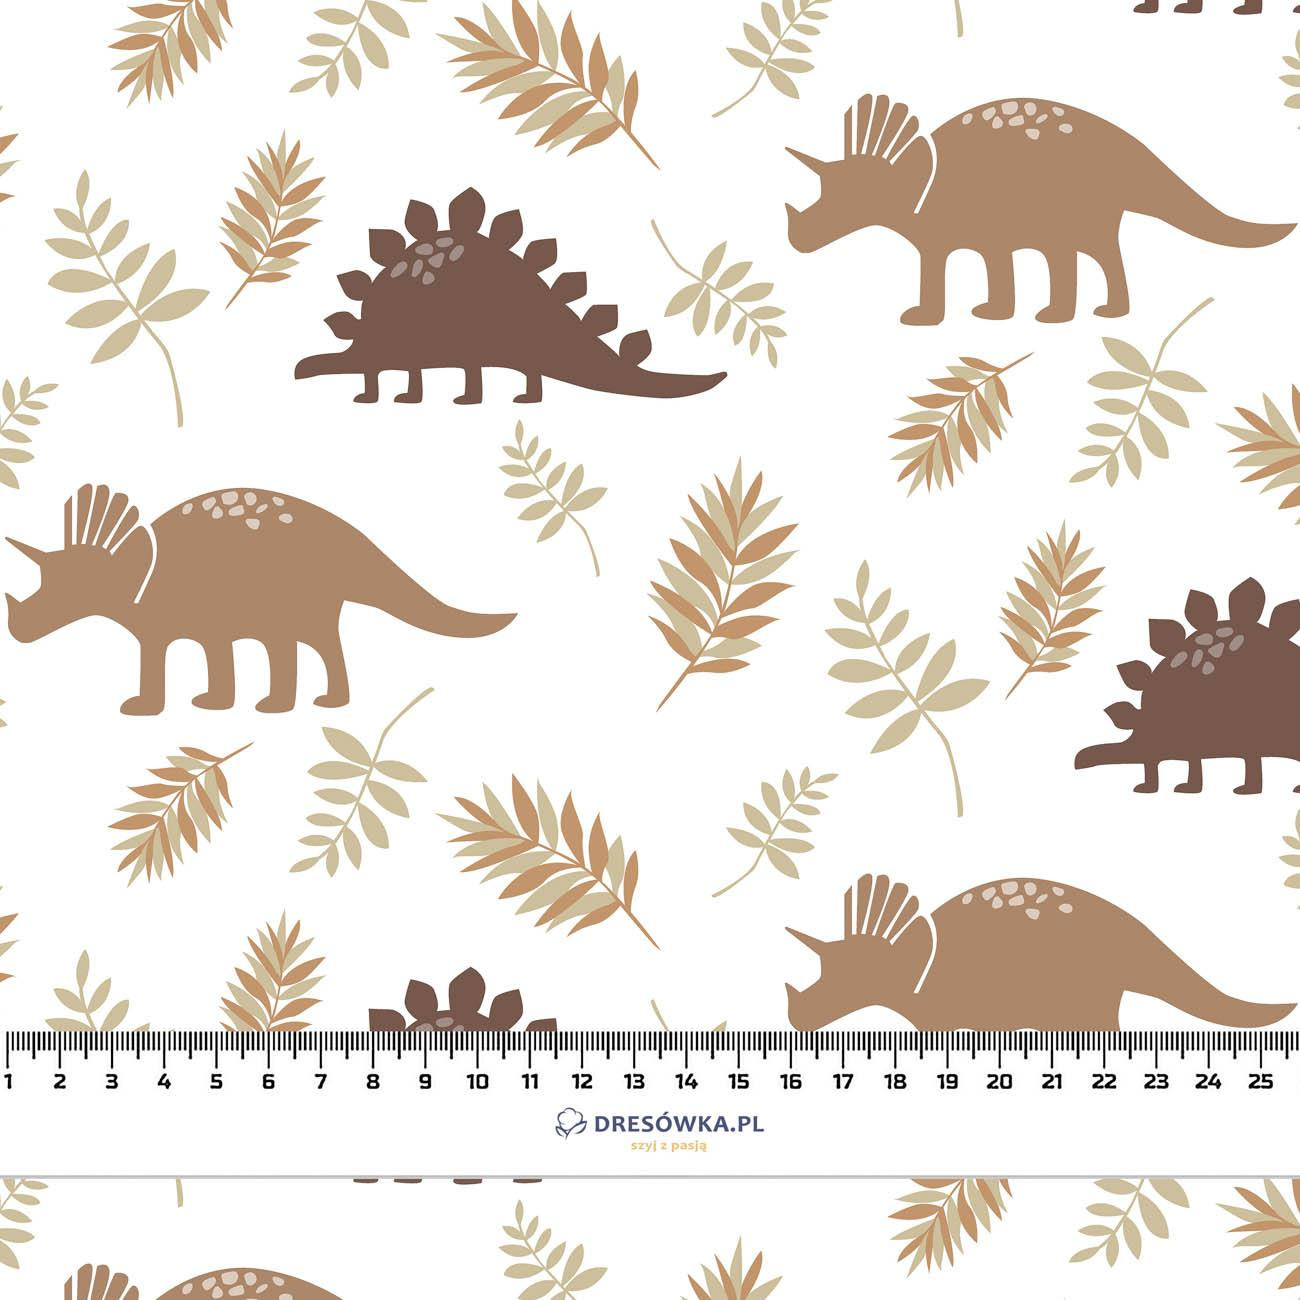 BROWN DINOSAURS PAT. 4 - Cotton woven fabric